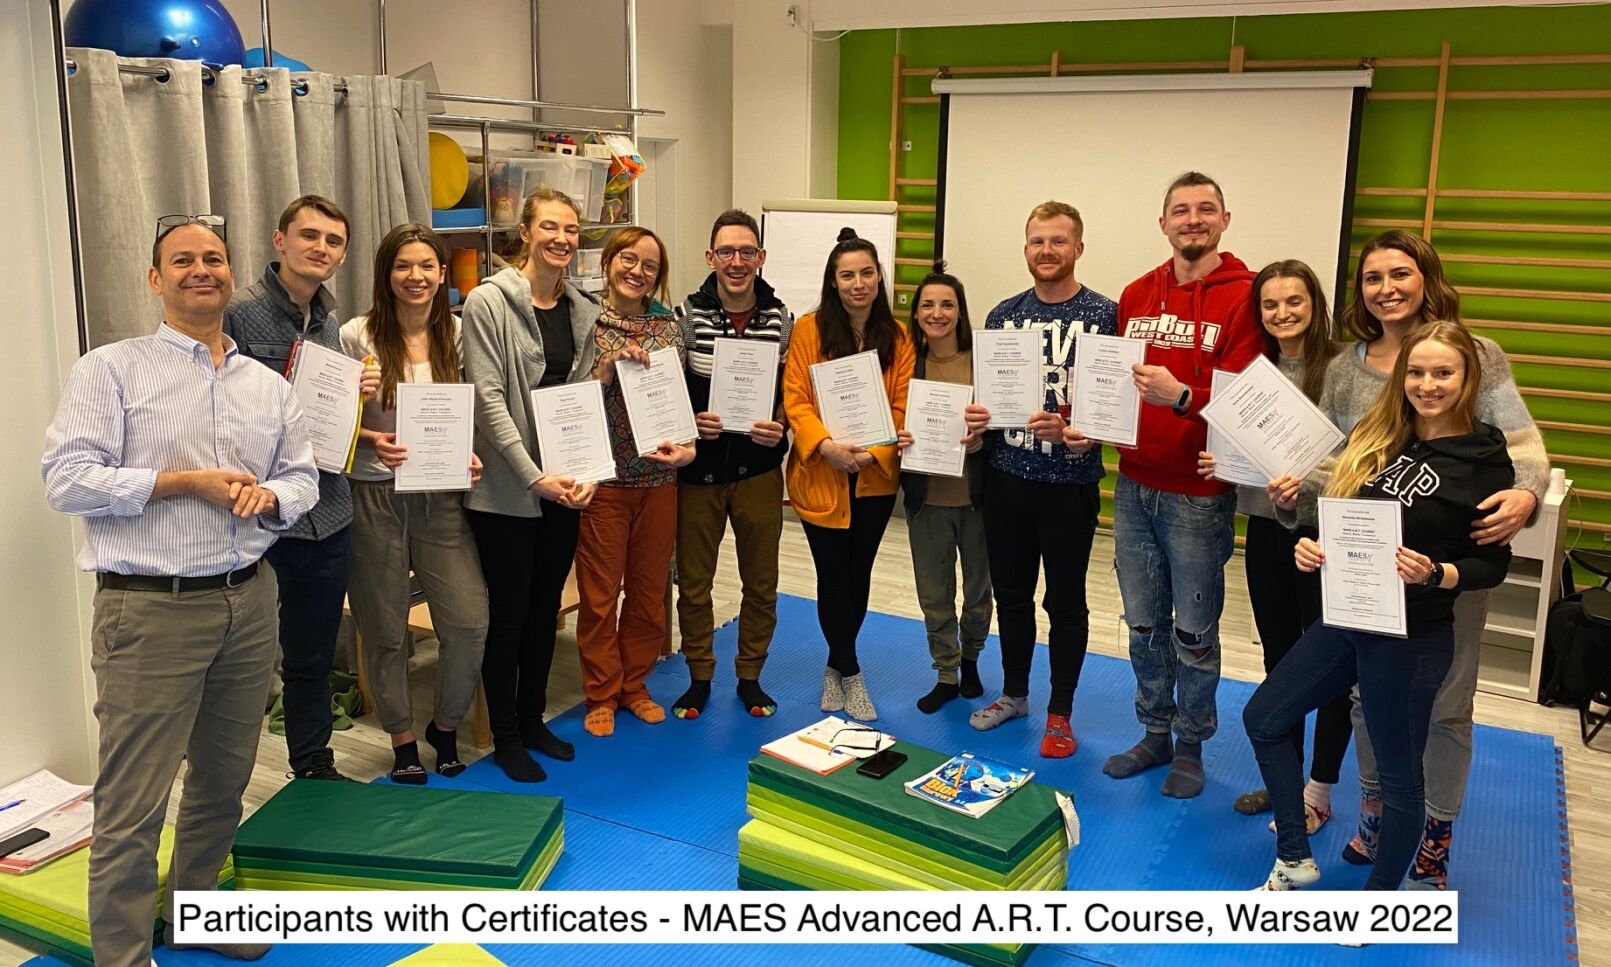 MAES Advanced A.R.T. Course, Warsaw 2022